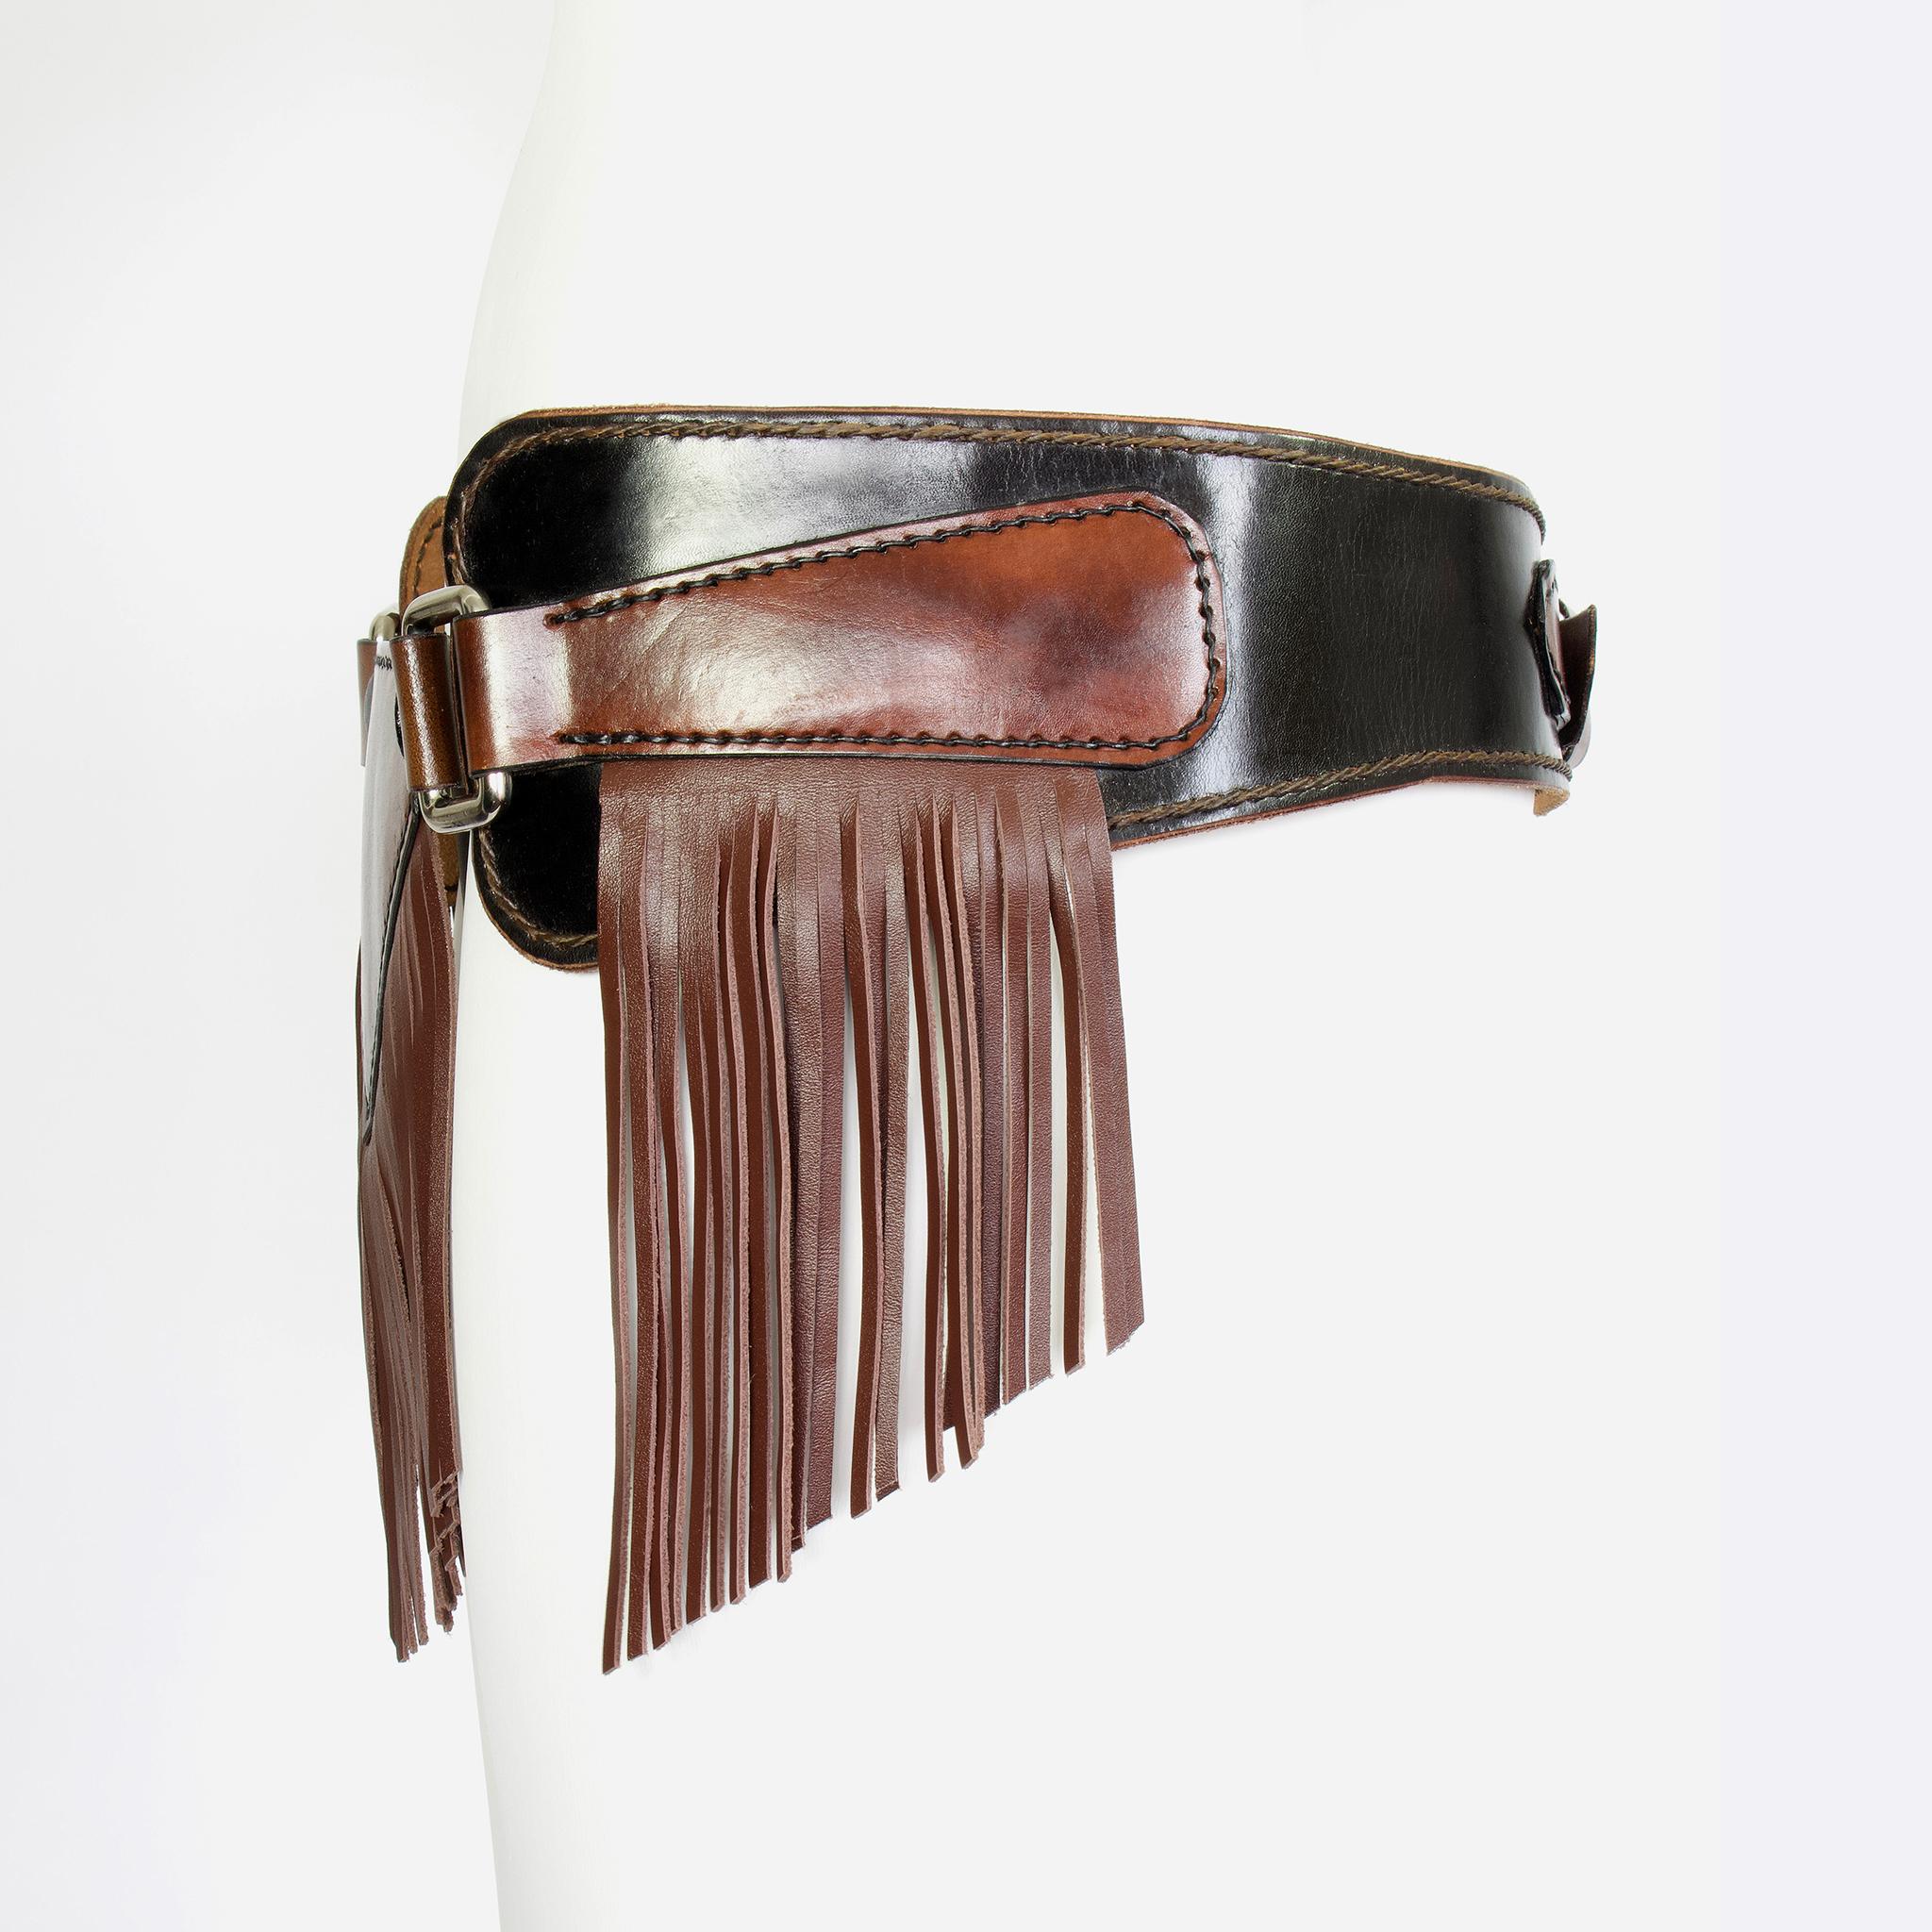 Product Details: Leather - Tassel Fringe Belt - RARE - One-Off Piece - Adjustable Back Buckle Fasten - Top Stitch Detailing 
Label: Unknown - One-Off Piece
Fabric Content: Chesnut Brown + Dark Brown / Leather 
Size: Medium 
Waist Circumference /